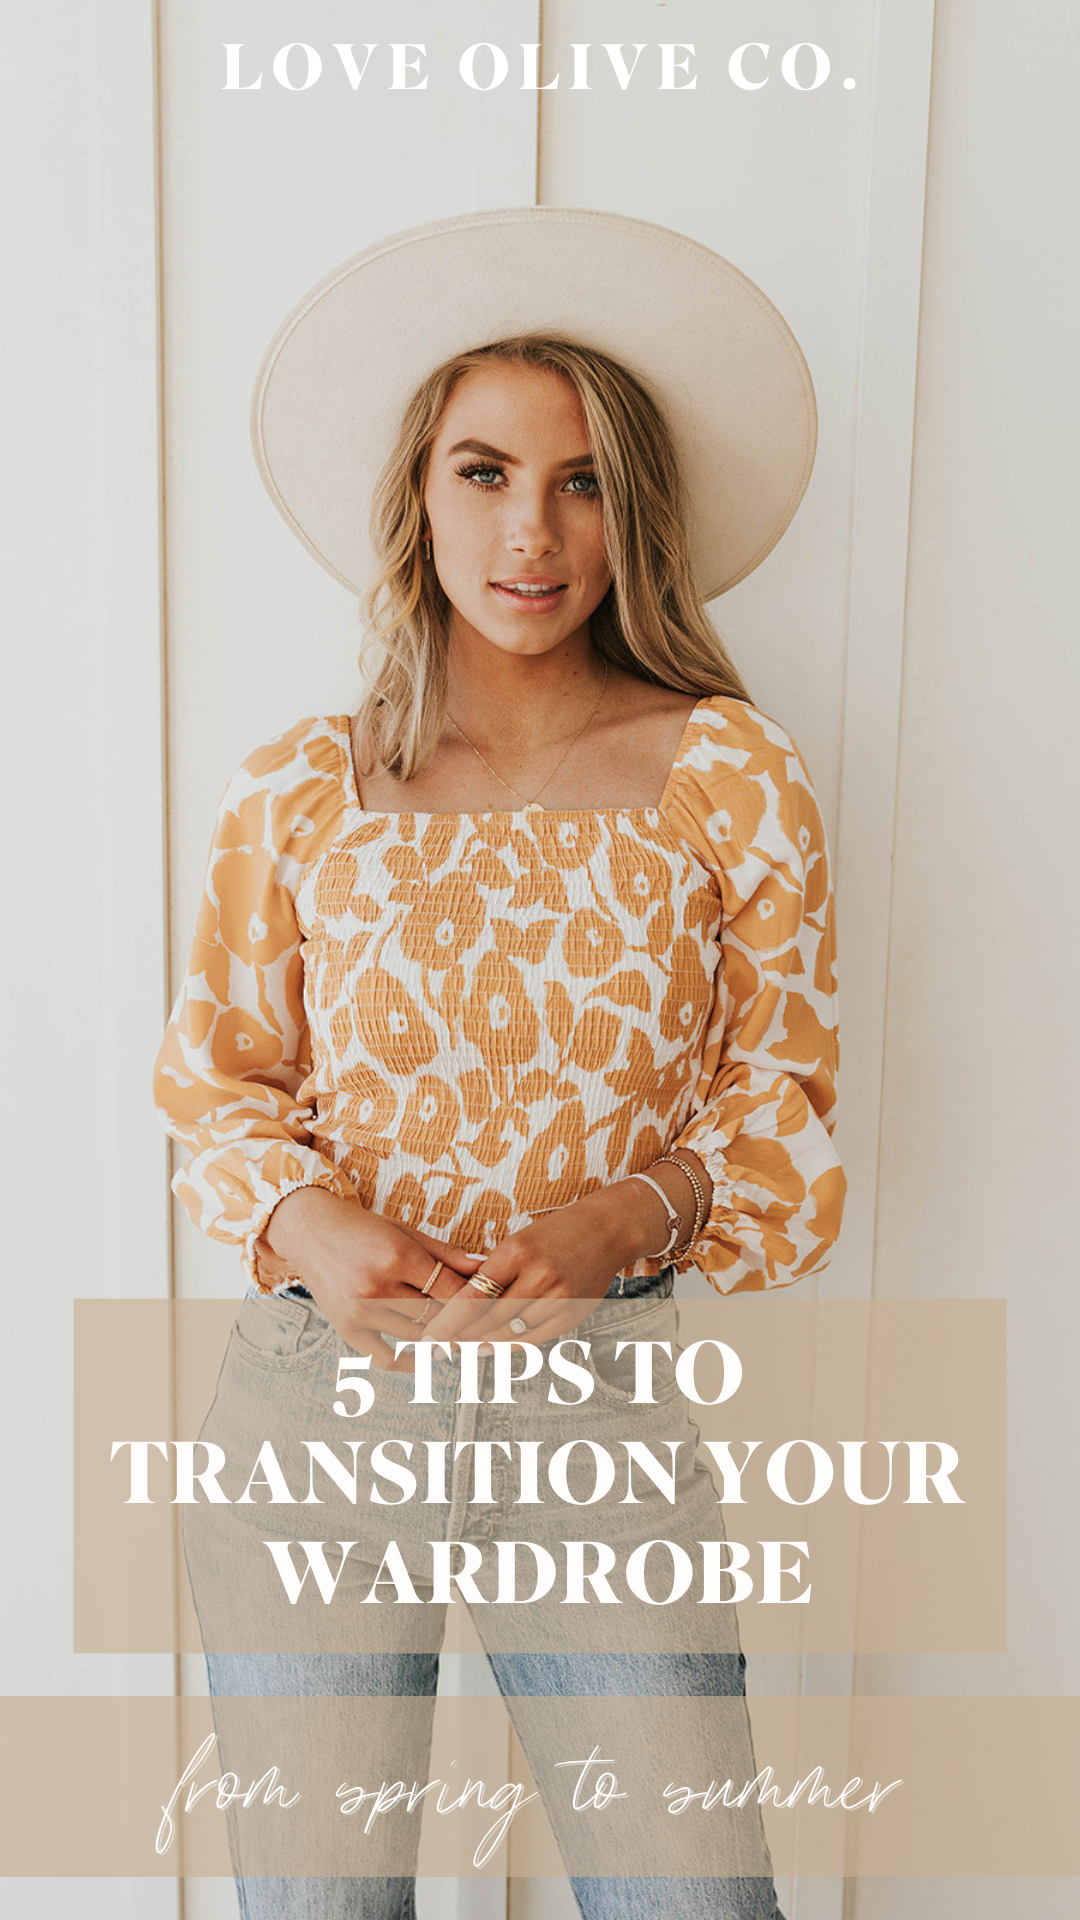 5 tips to transition your wardrobe from spring to summer. www.loveoliveco.com